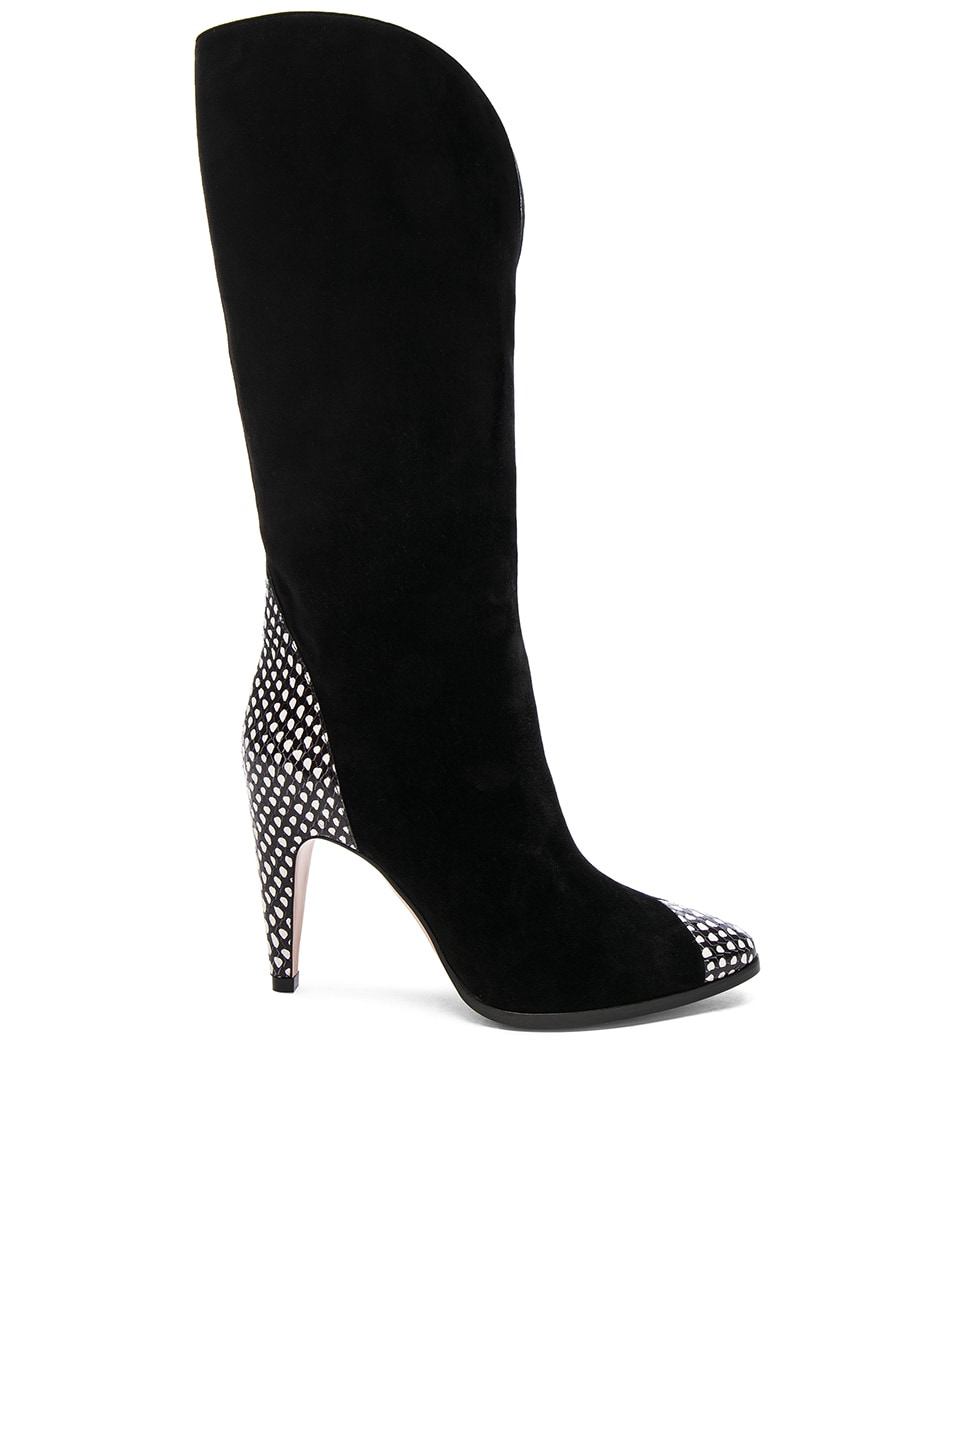 Image 1 of Givenchy Snakeskin Trim Suede Boots in Black & White